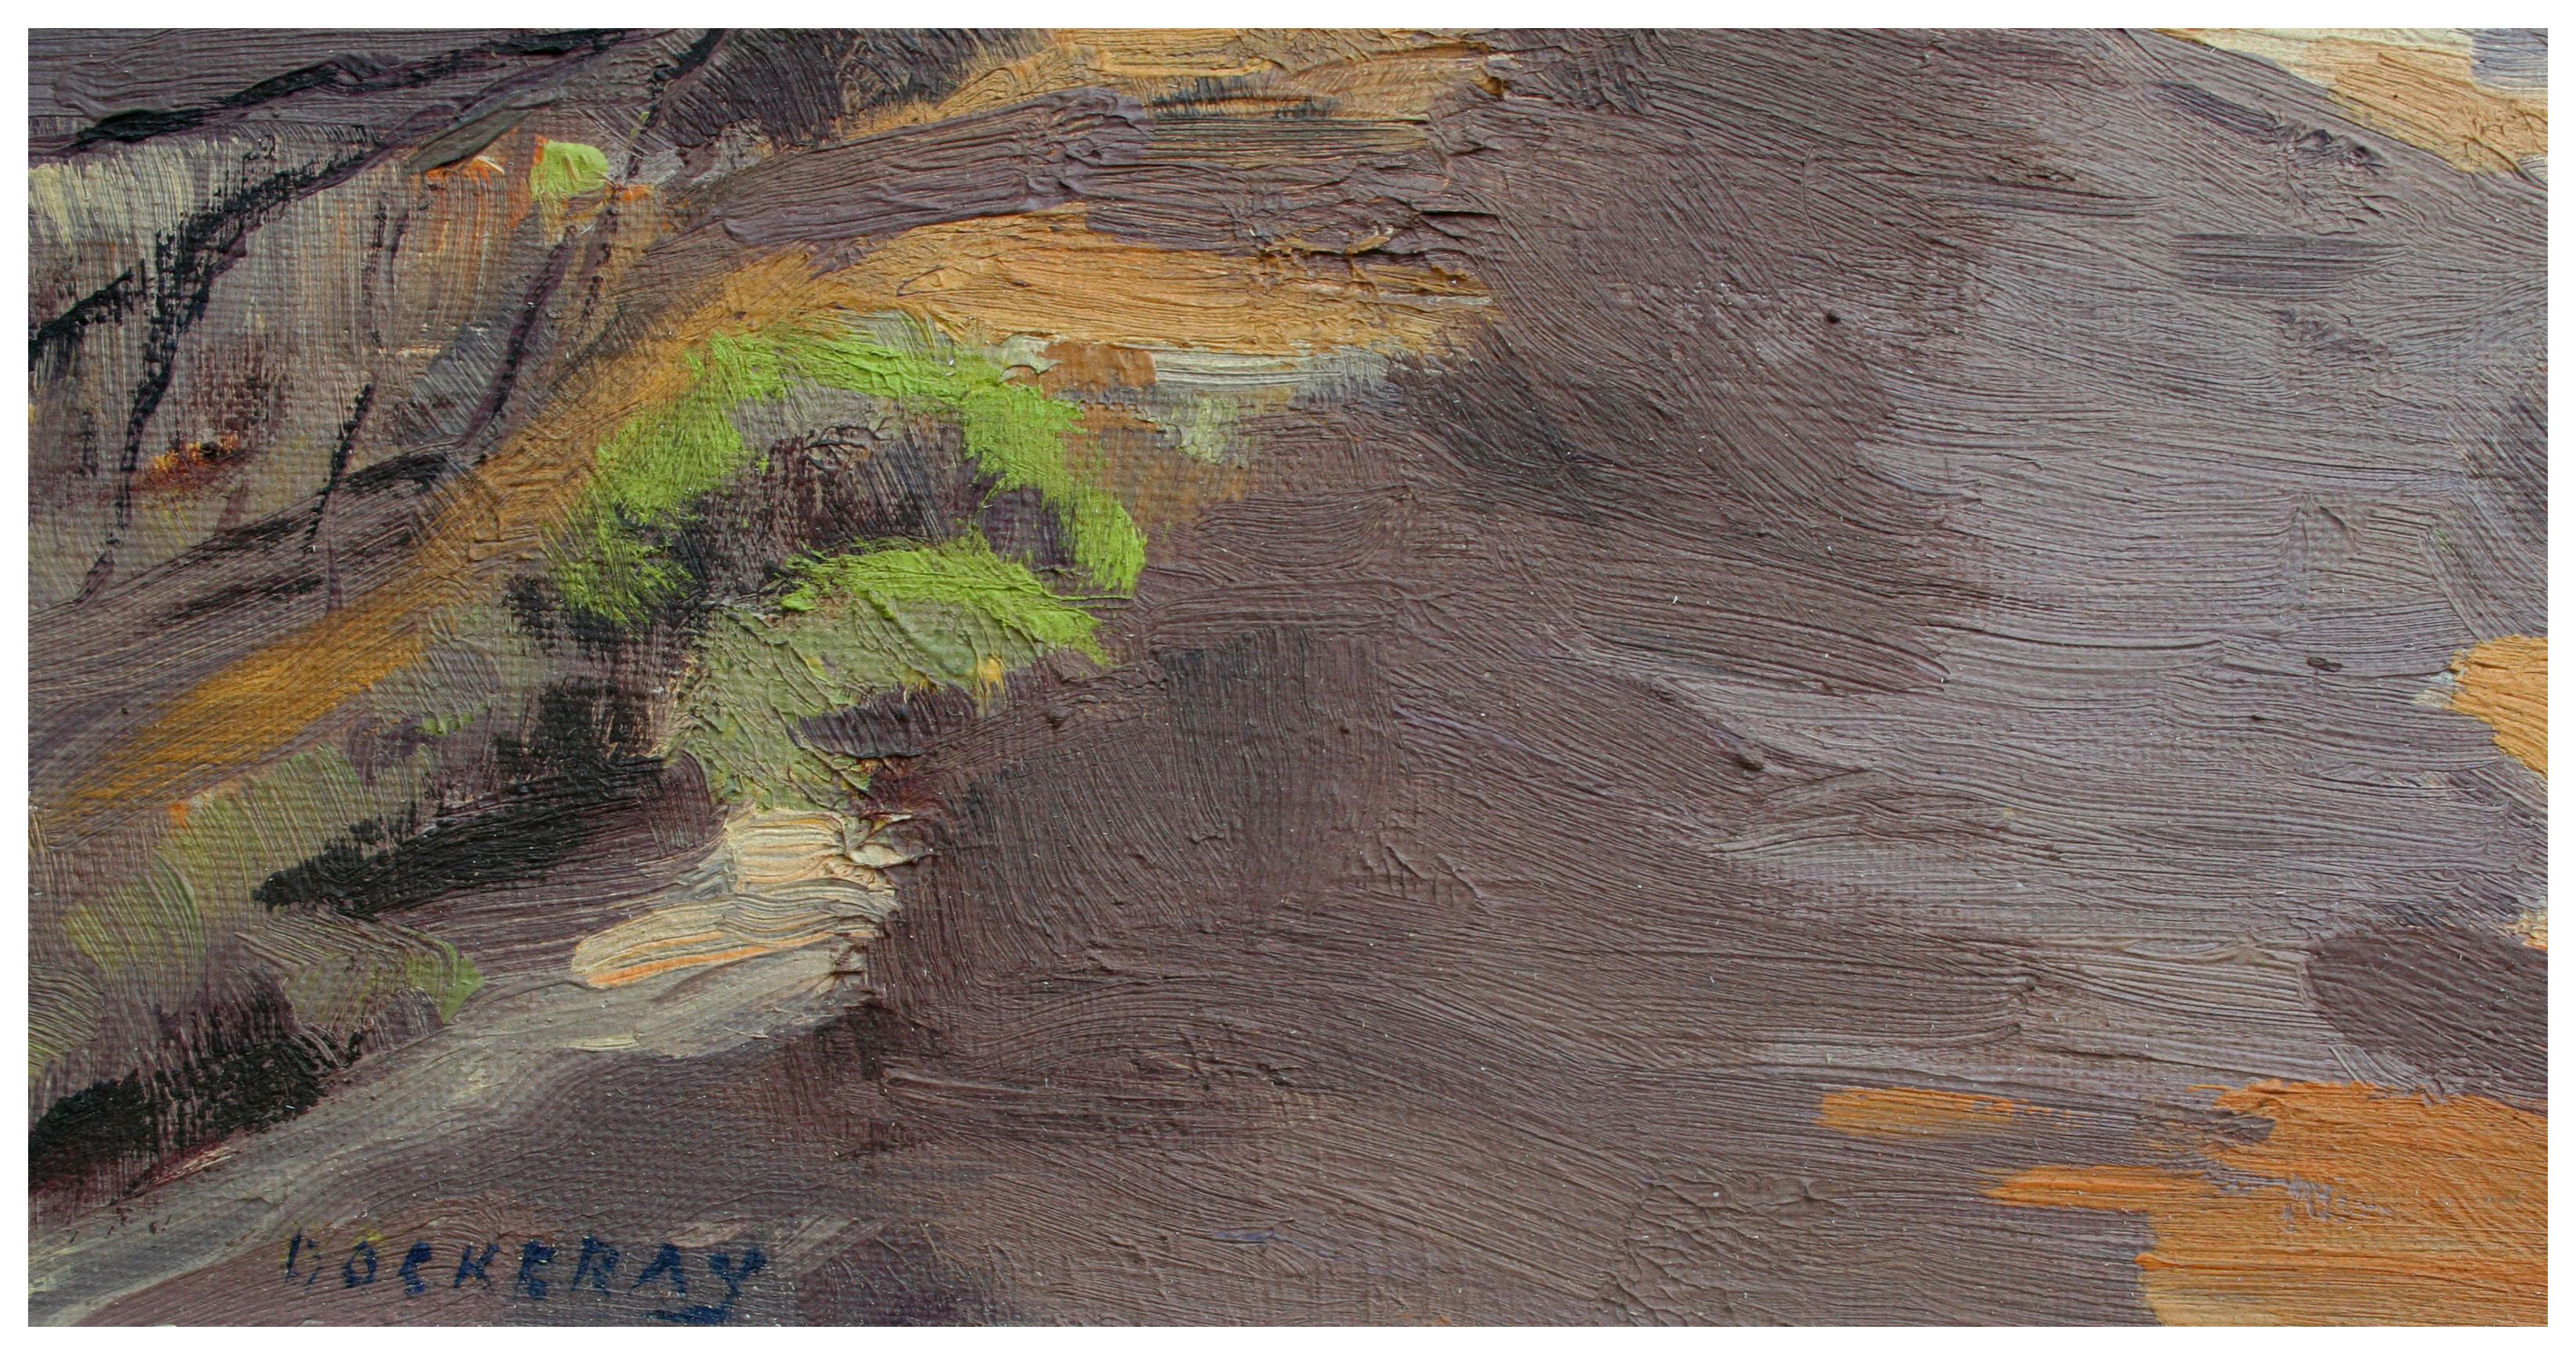 Mid Century Landscape -- Pathway Through the Forest - Brown Landscape Painting by J. Dockeray